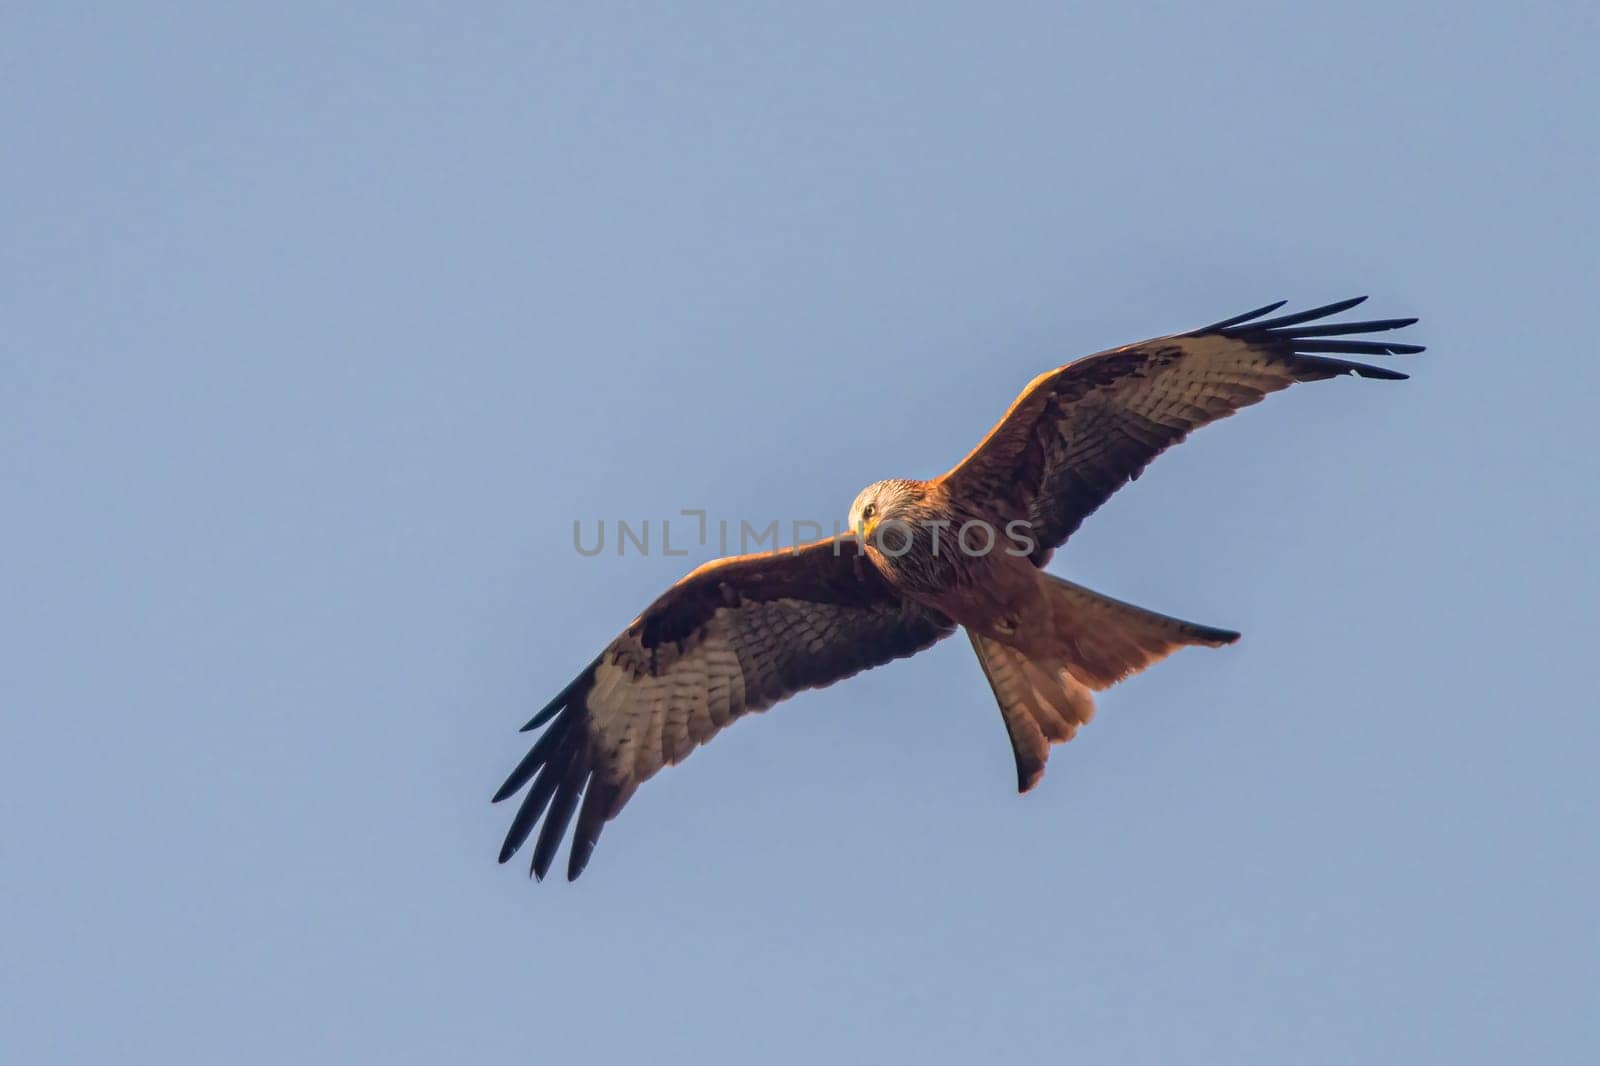 red kite flies in the blue sky looking for prey by mario_plechaty_photography